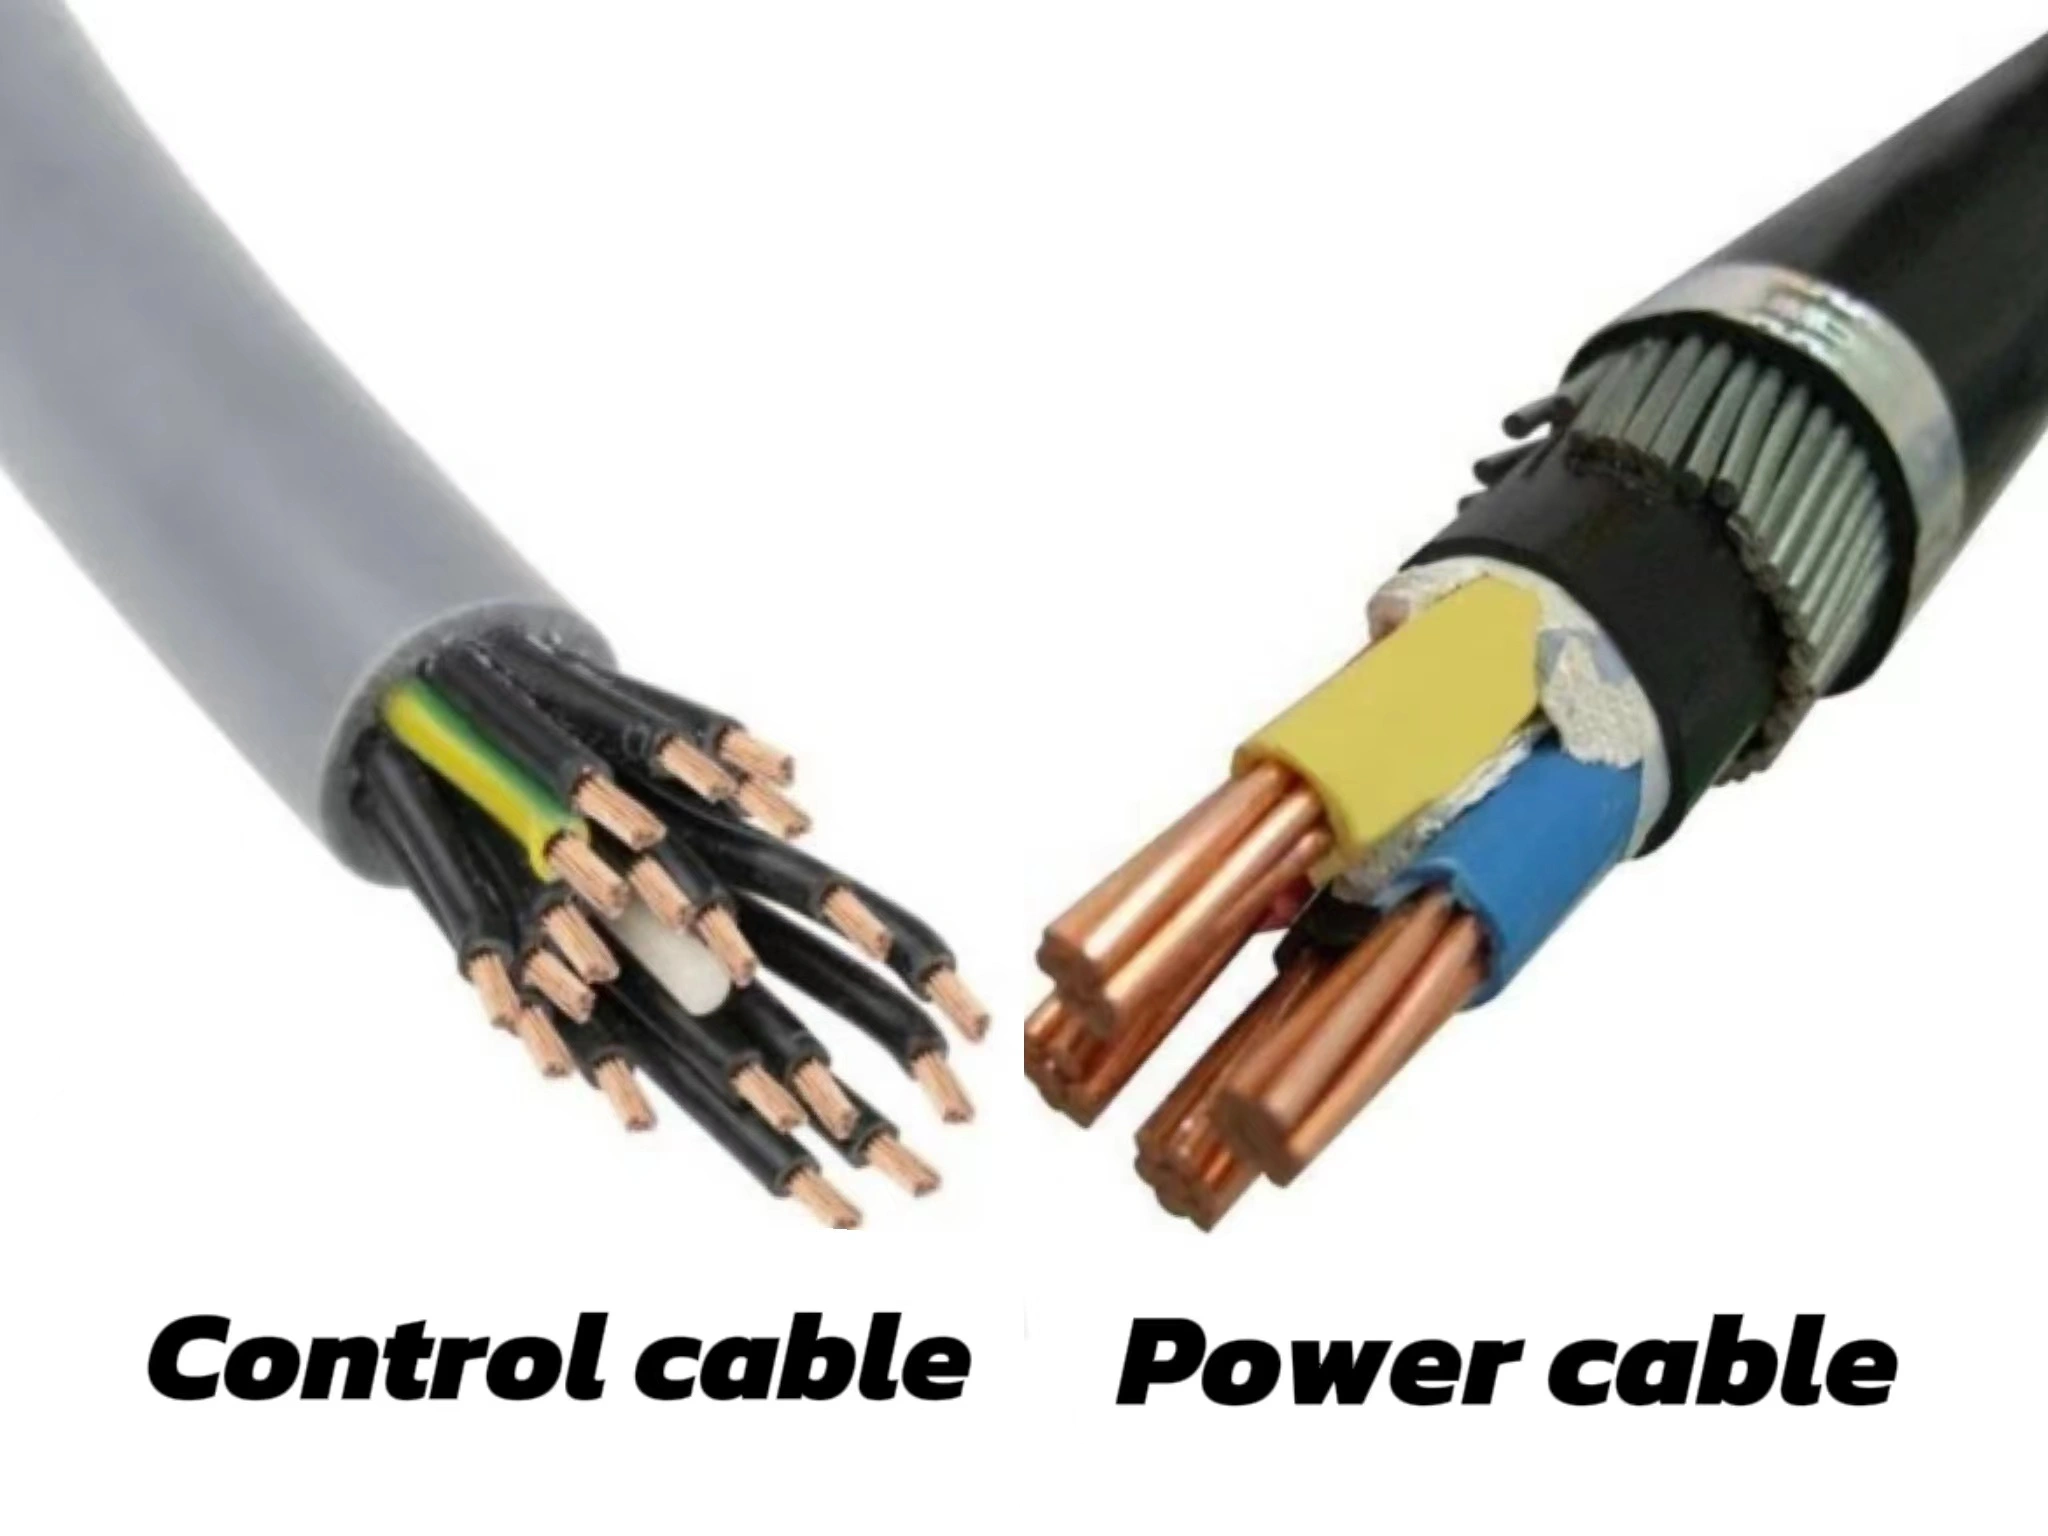 power cable vs control cable